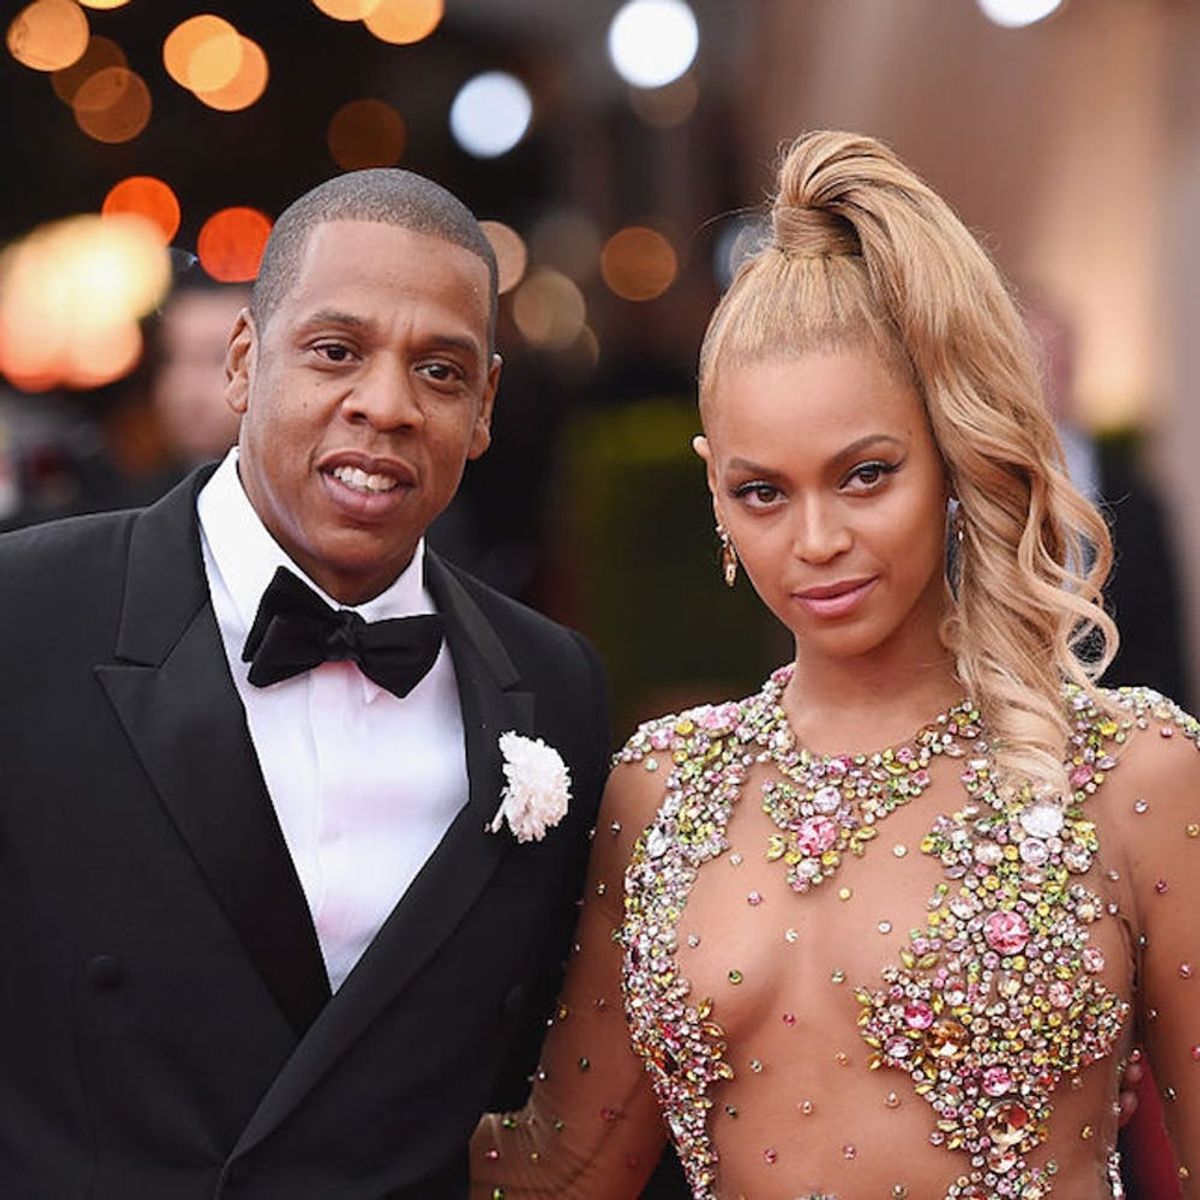 Beyoncé Reportedly Had Input on Every Single Track on JAY-Z’s New Album